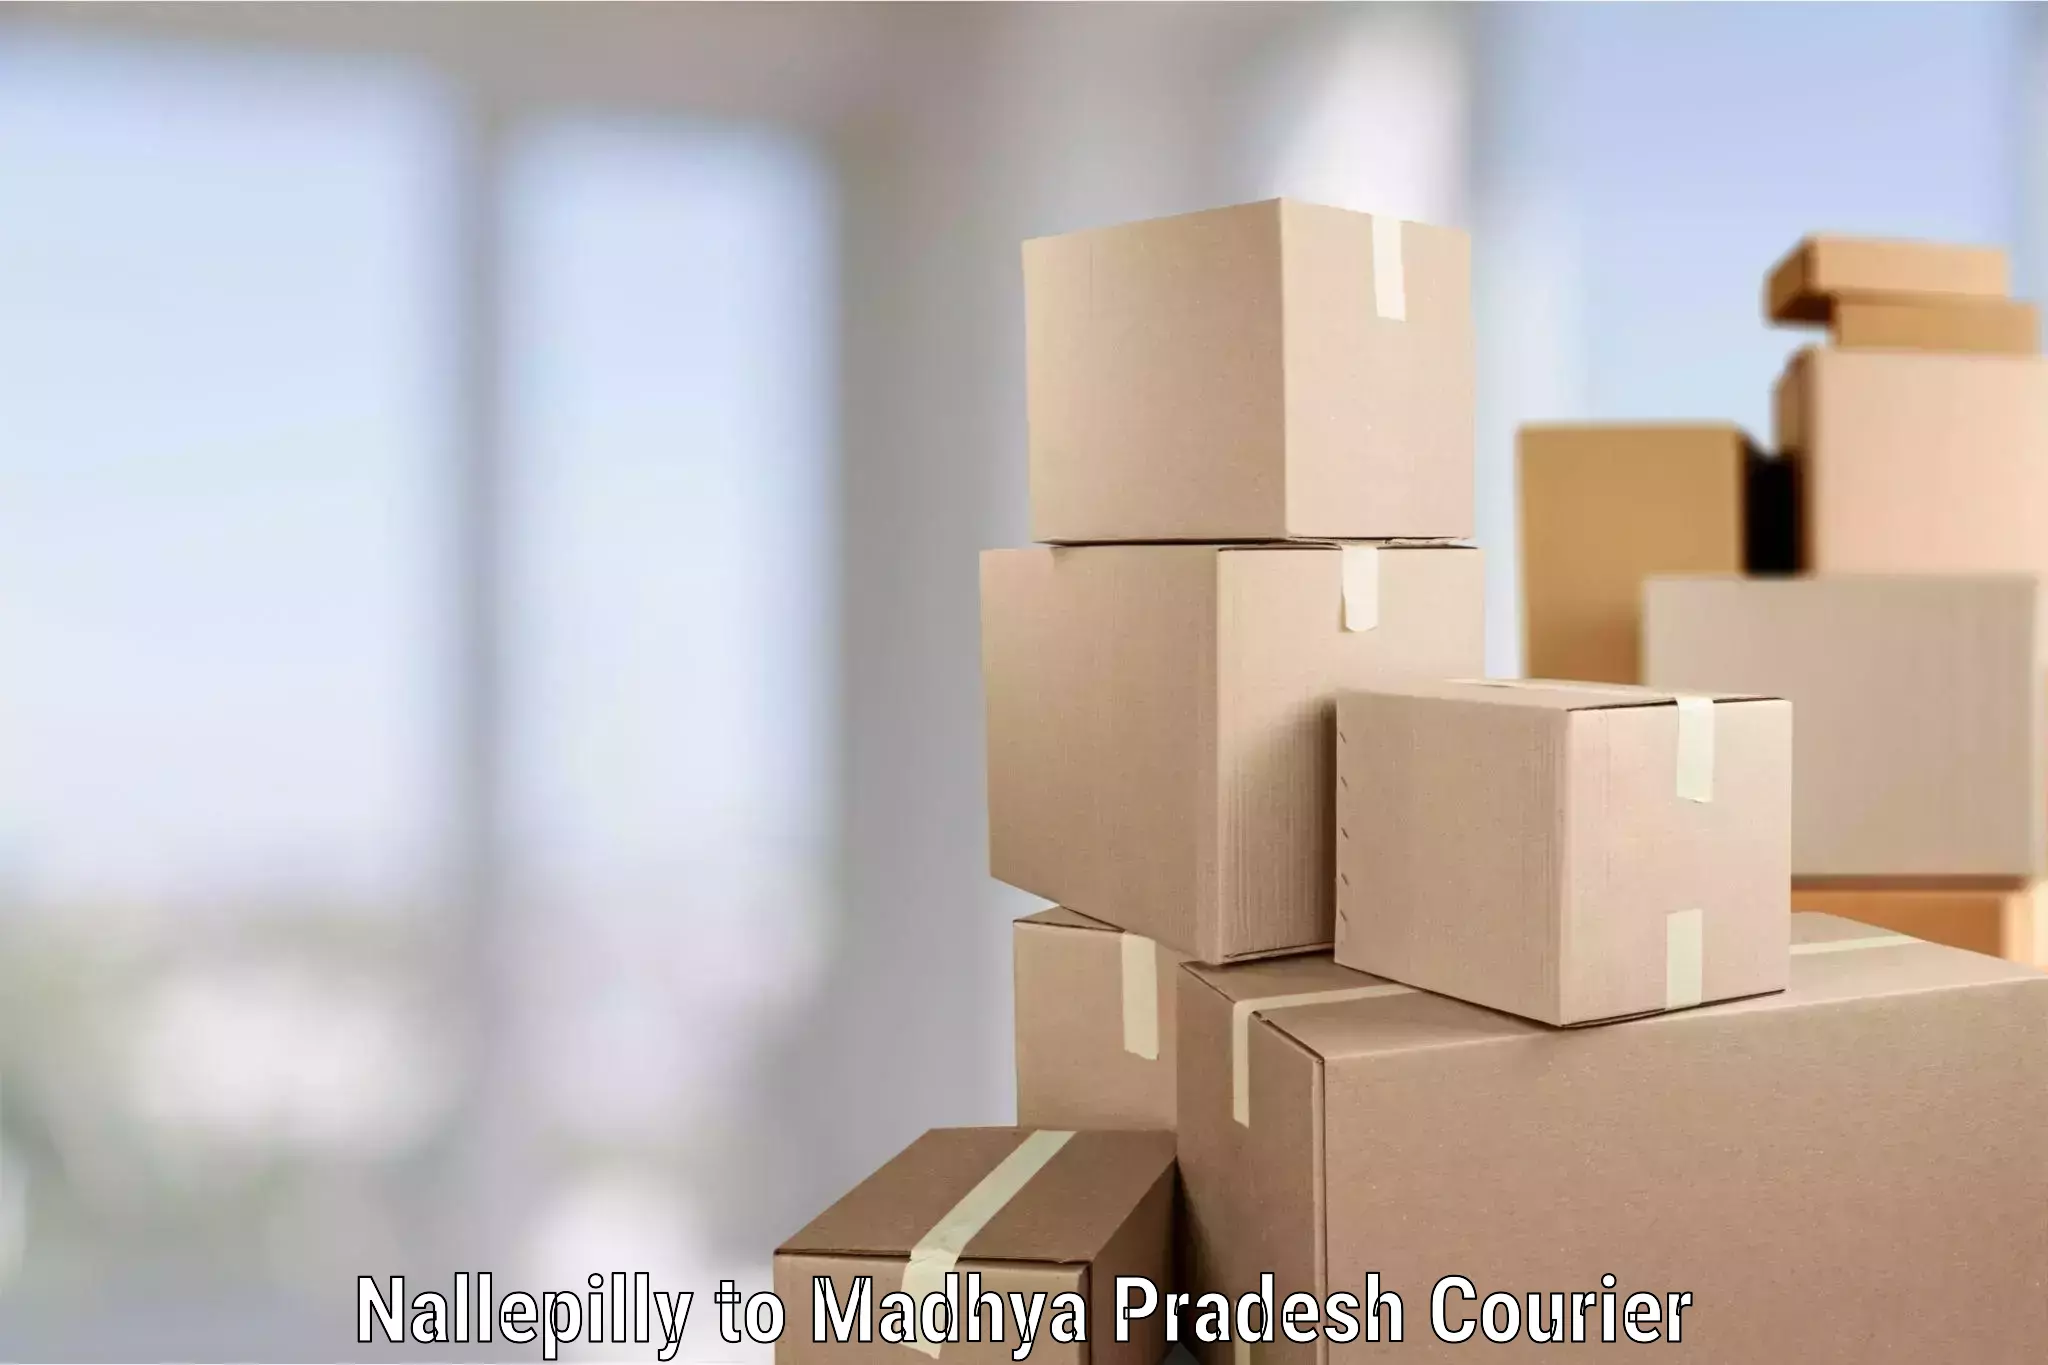 Efficient packing and moving Nallepilly to Indore